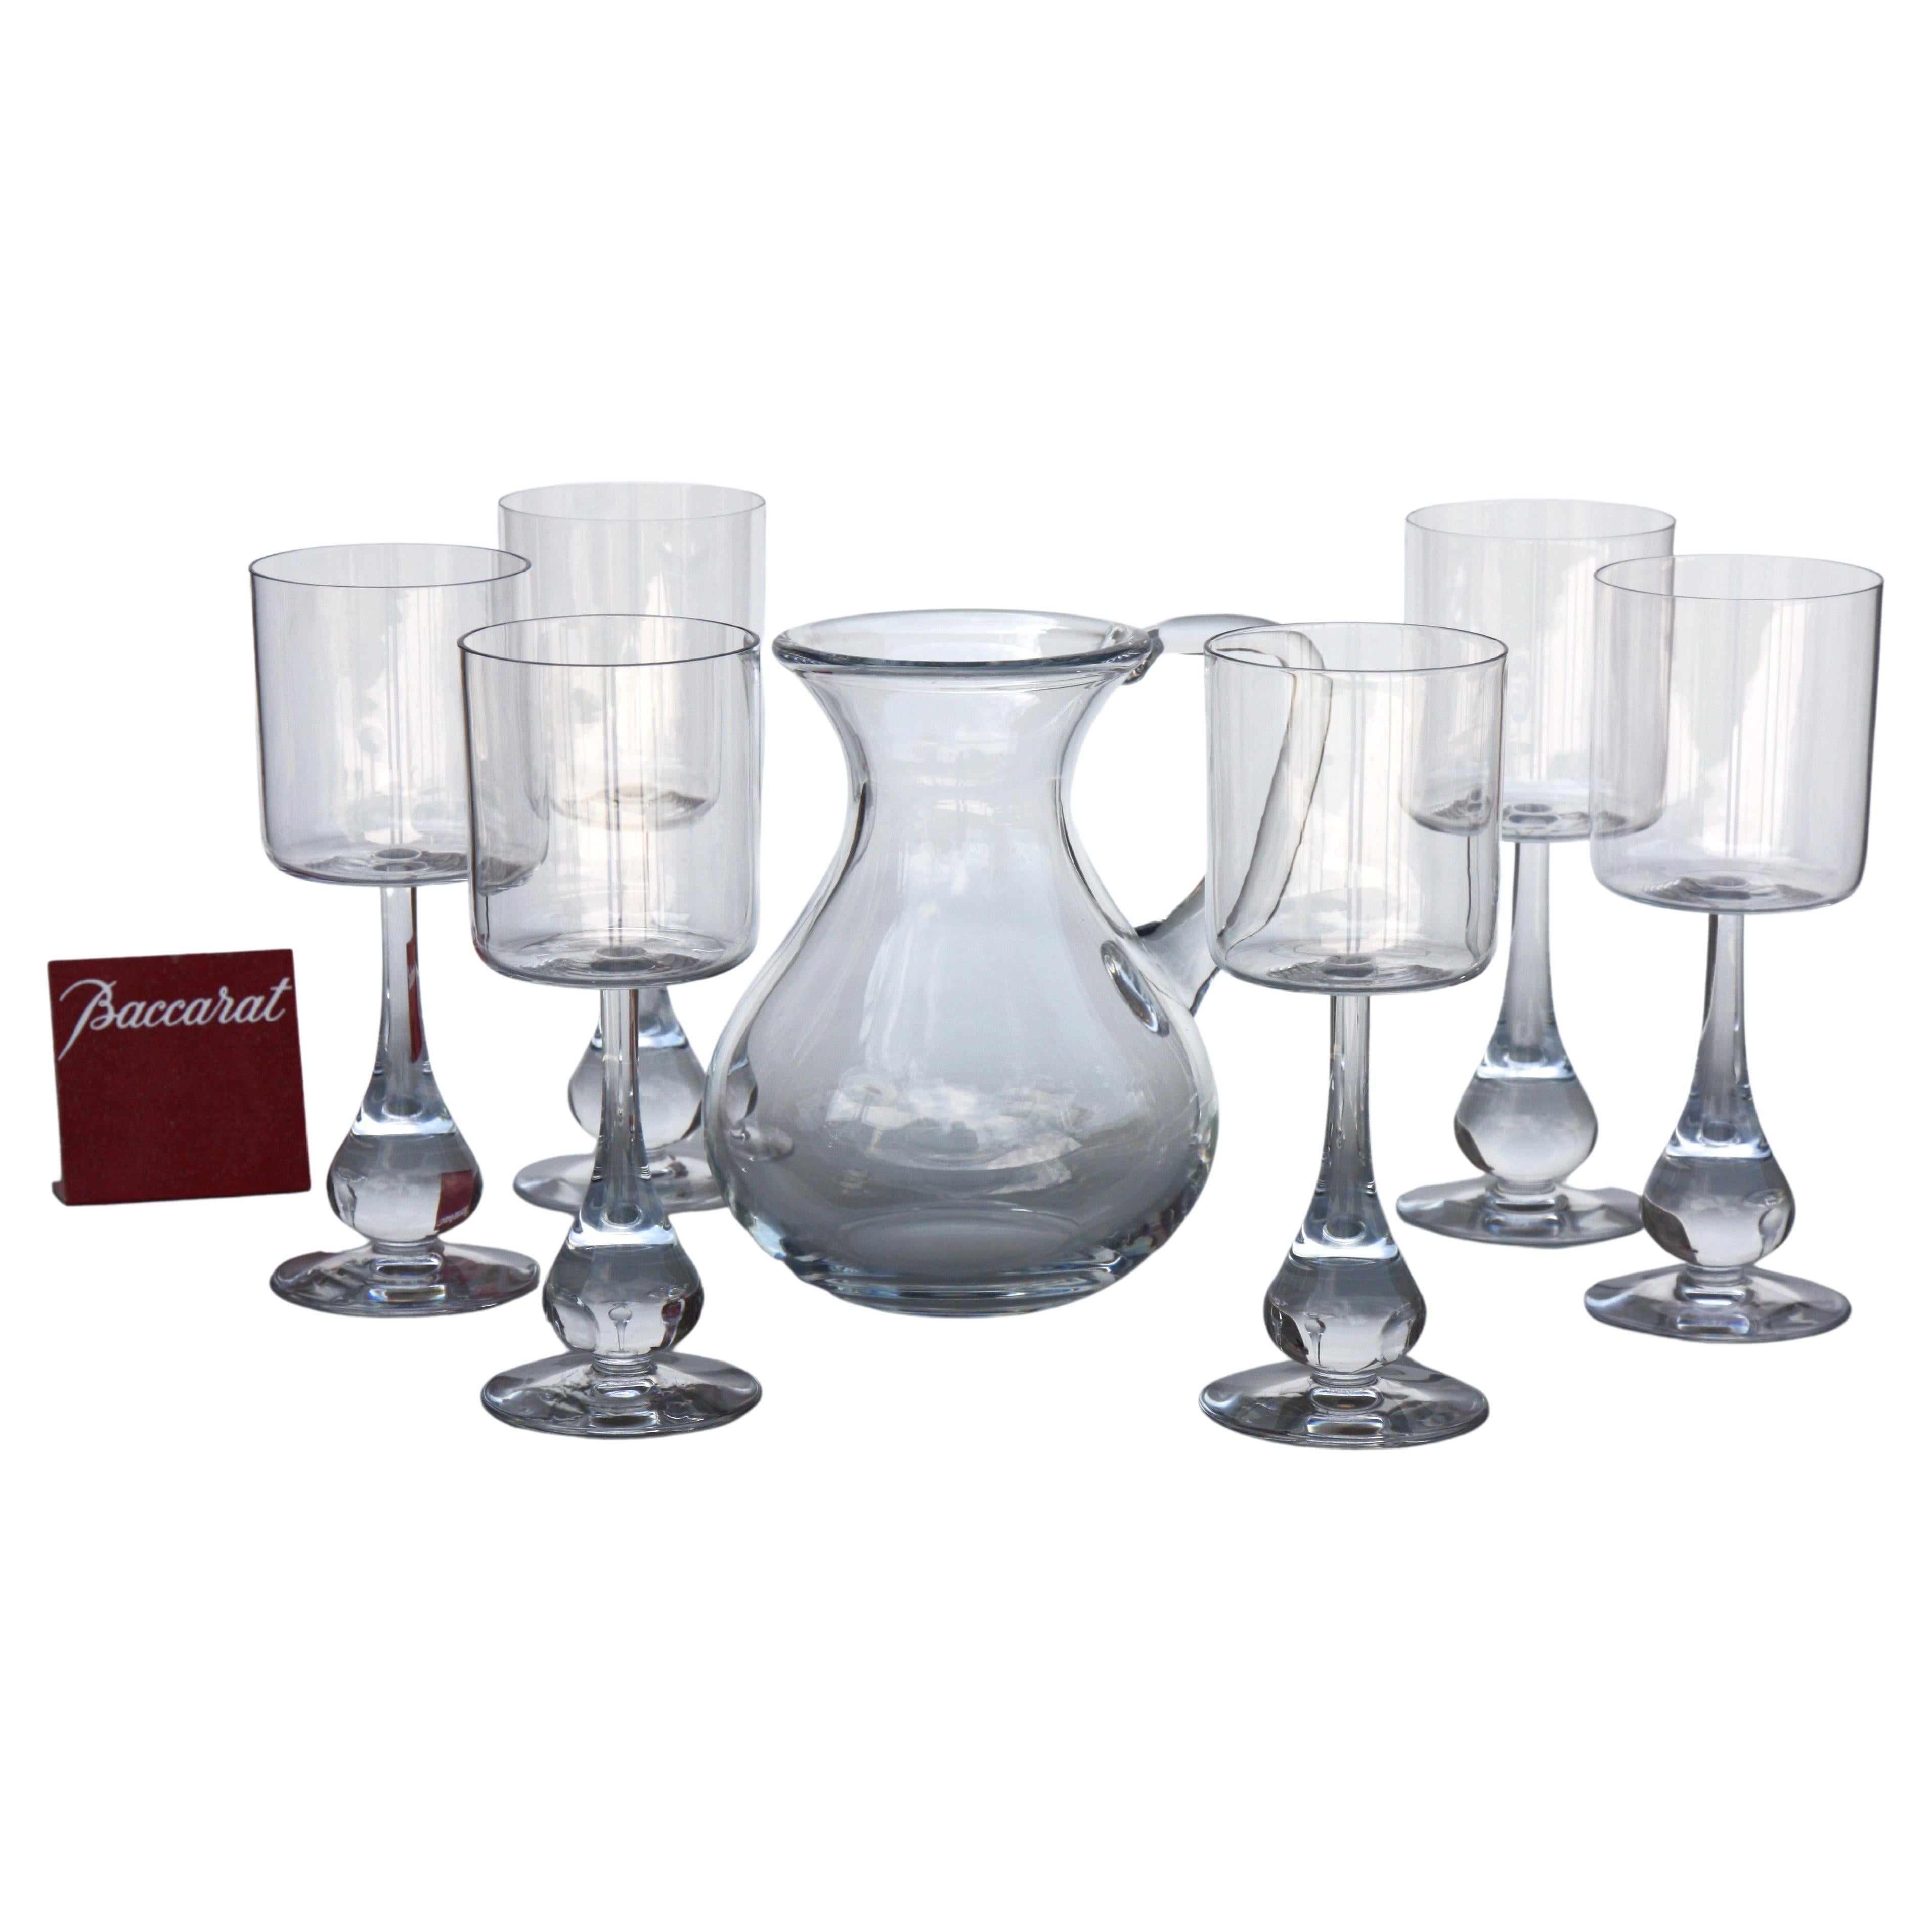 Water set in Baccarat crystal, José model. Glasses and water pitcher